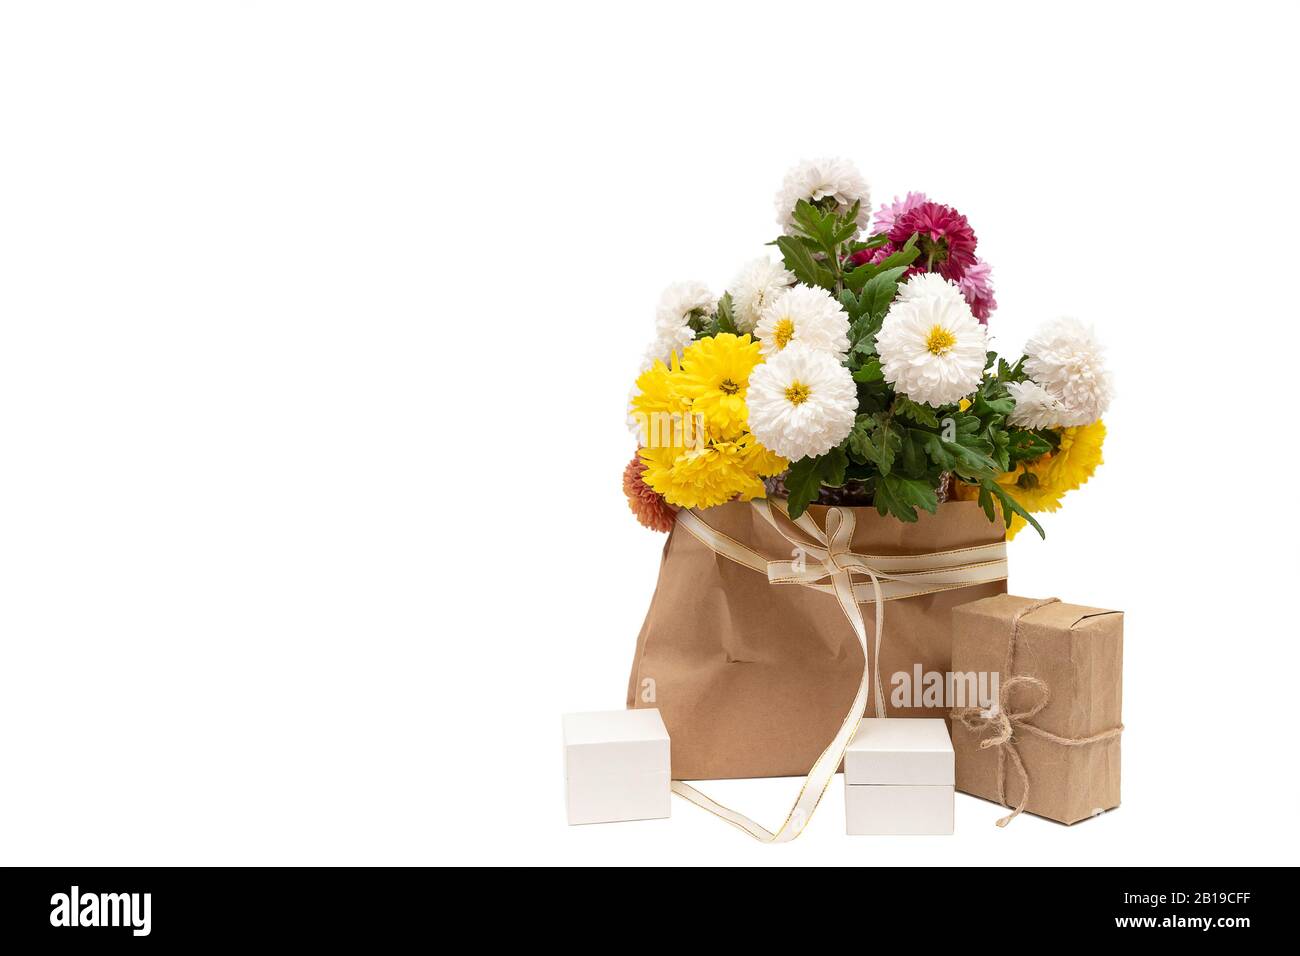 Bouquet of flowers and gift box on white background Stock Photo